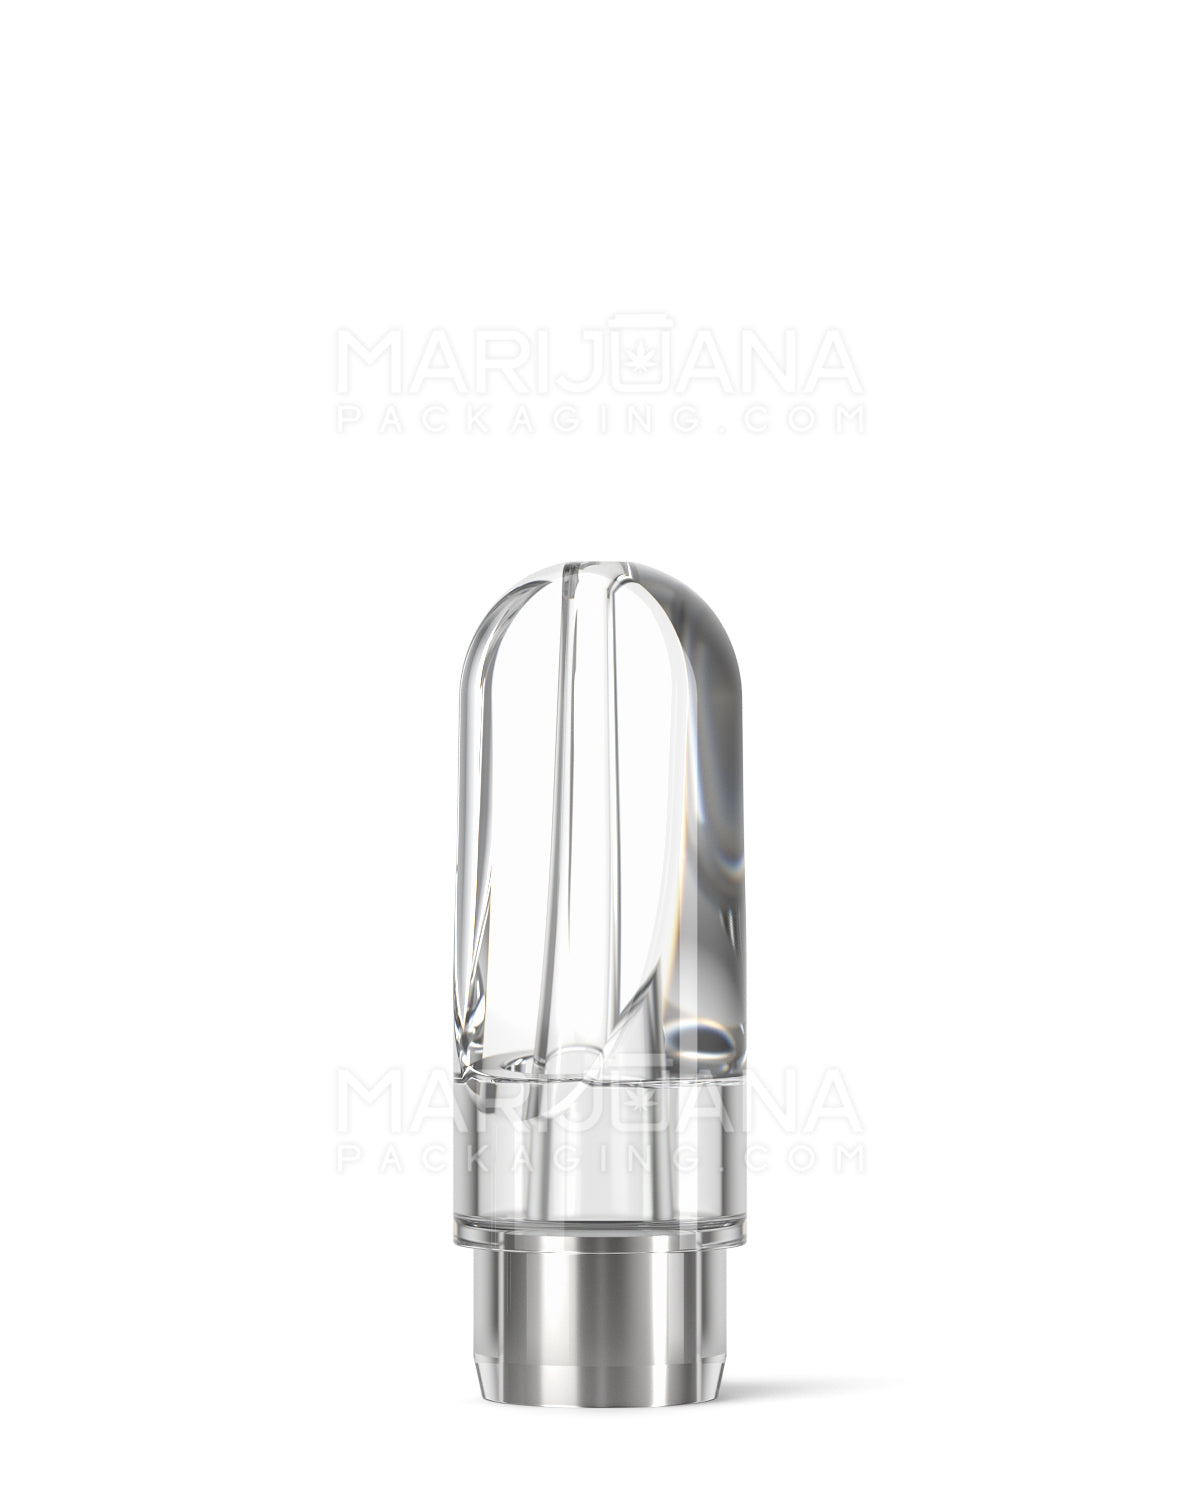 AVD | Flat Vape Mouthpiece for Plastic Cartridges | Clear Plastic - Press On - 600 Count - 2